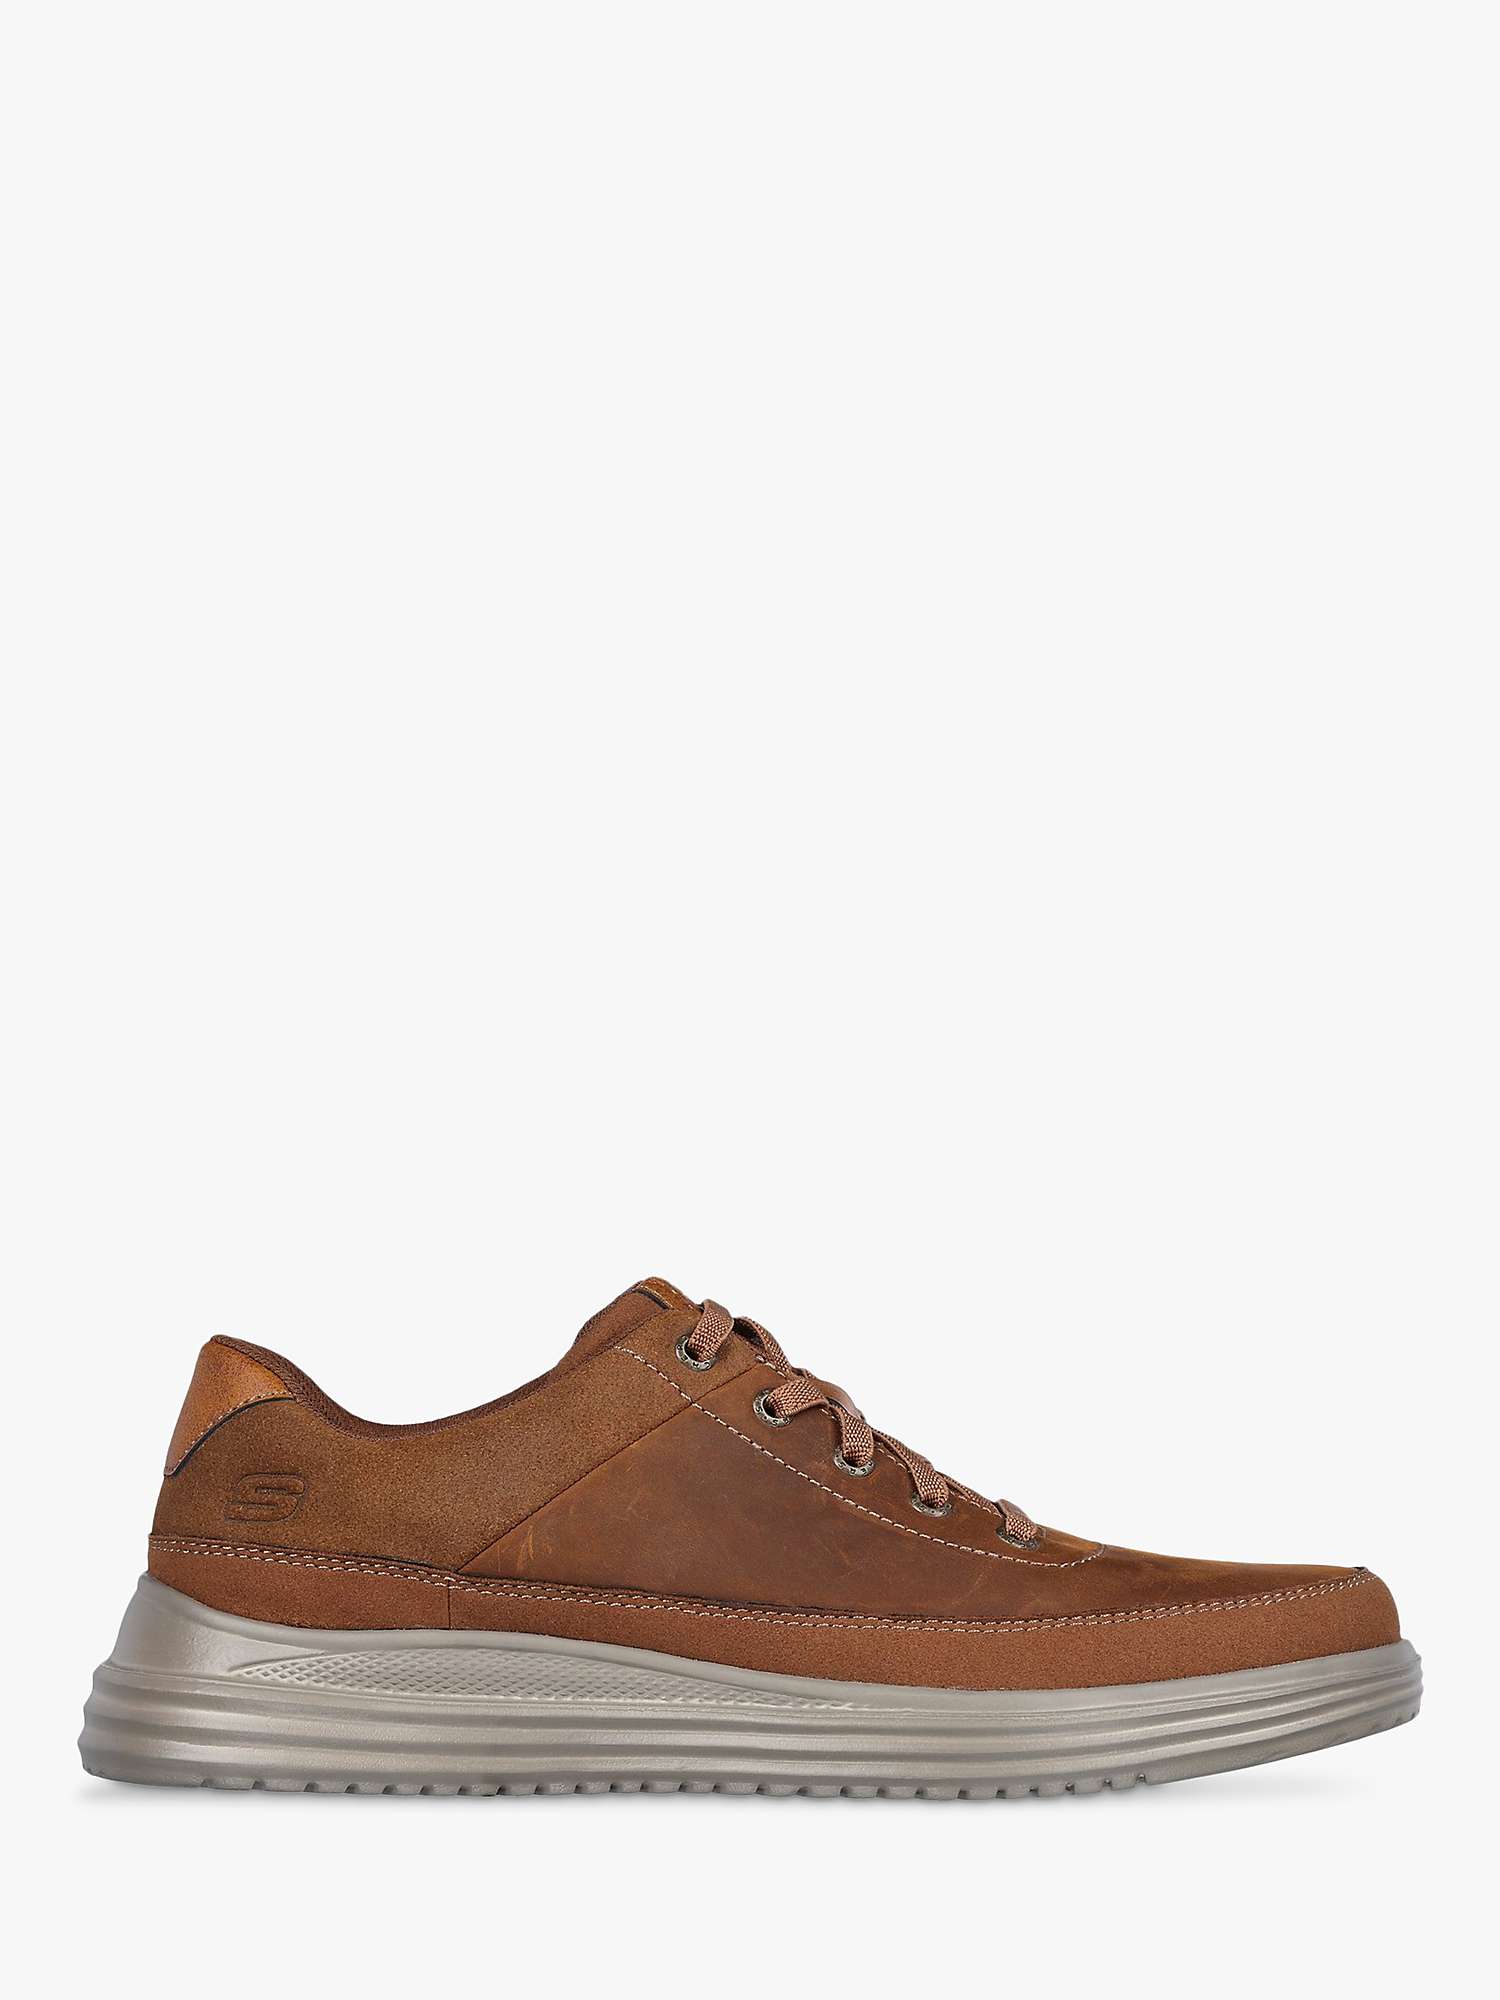 Skechers Proven Aldeno Leather Trainers, Dark Brown at John Lewis ...